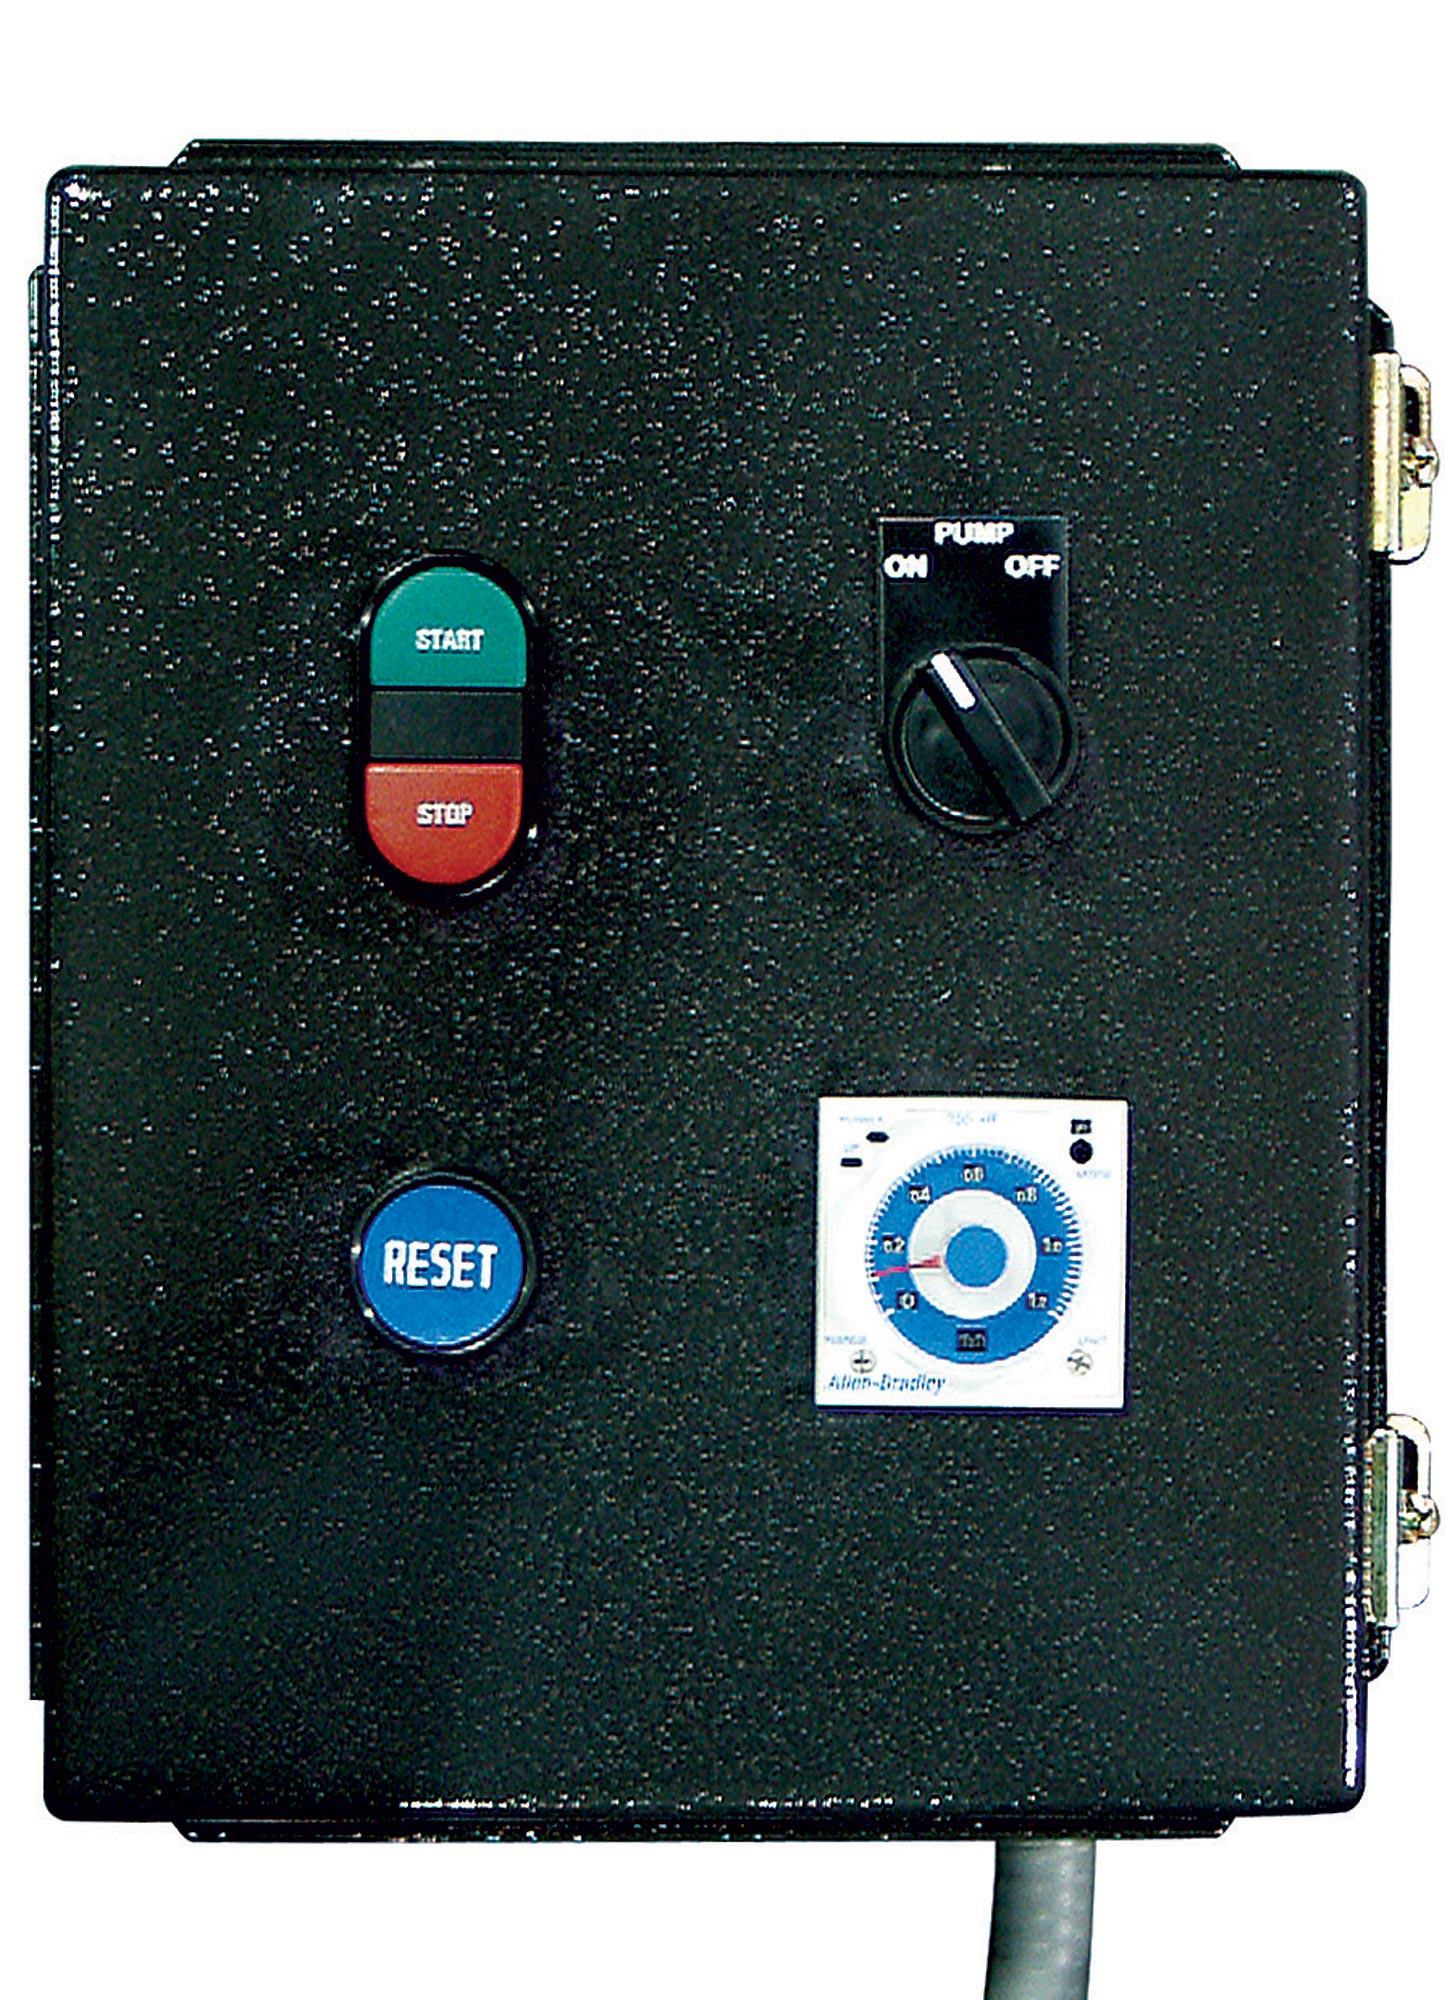 Optional Magnetic Starter with Integrated Timer. Available in single or three phase voltages.